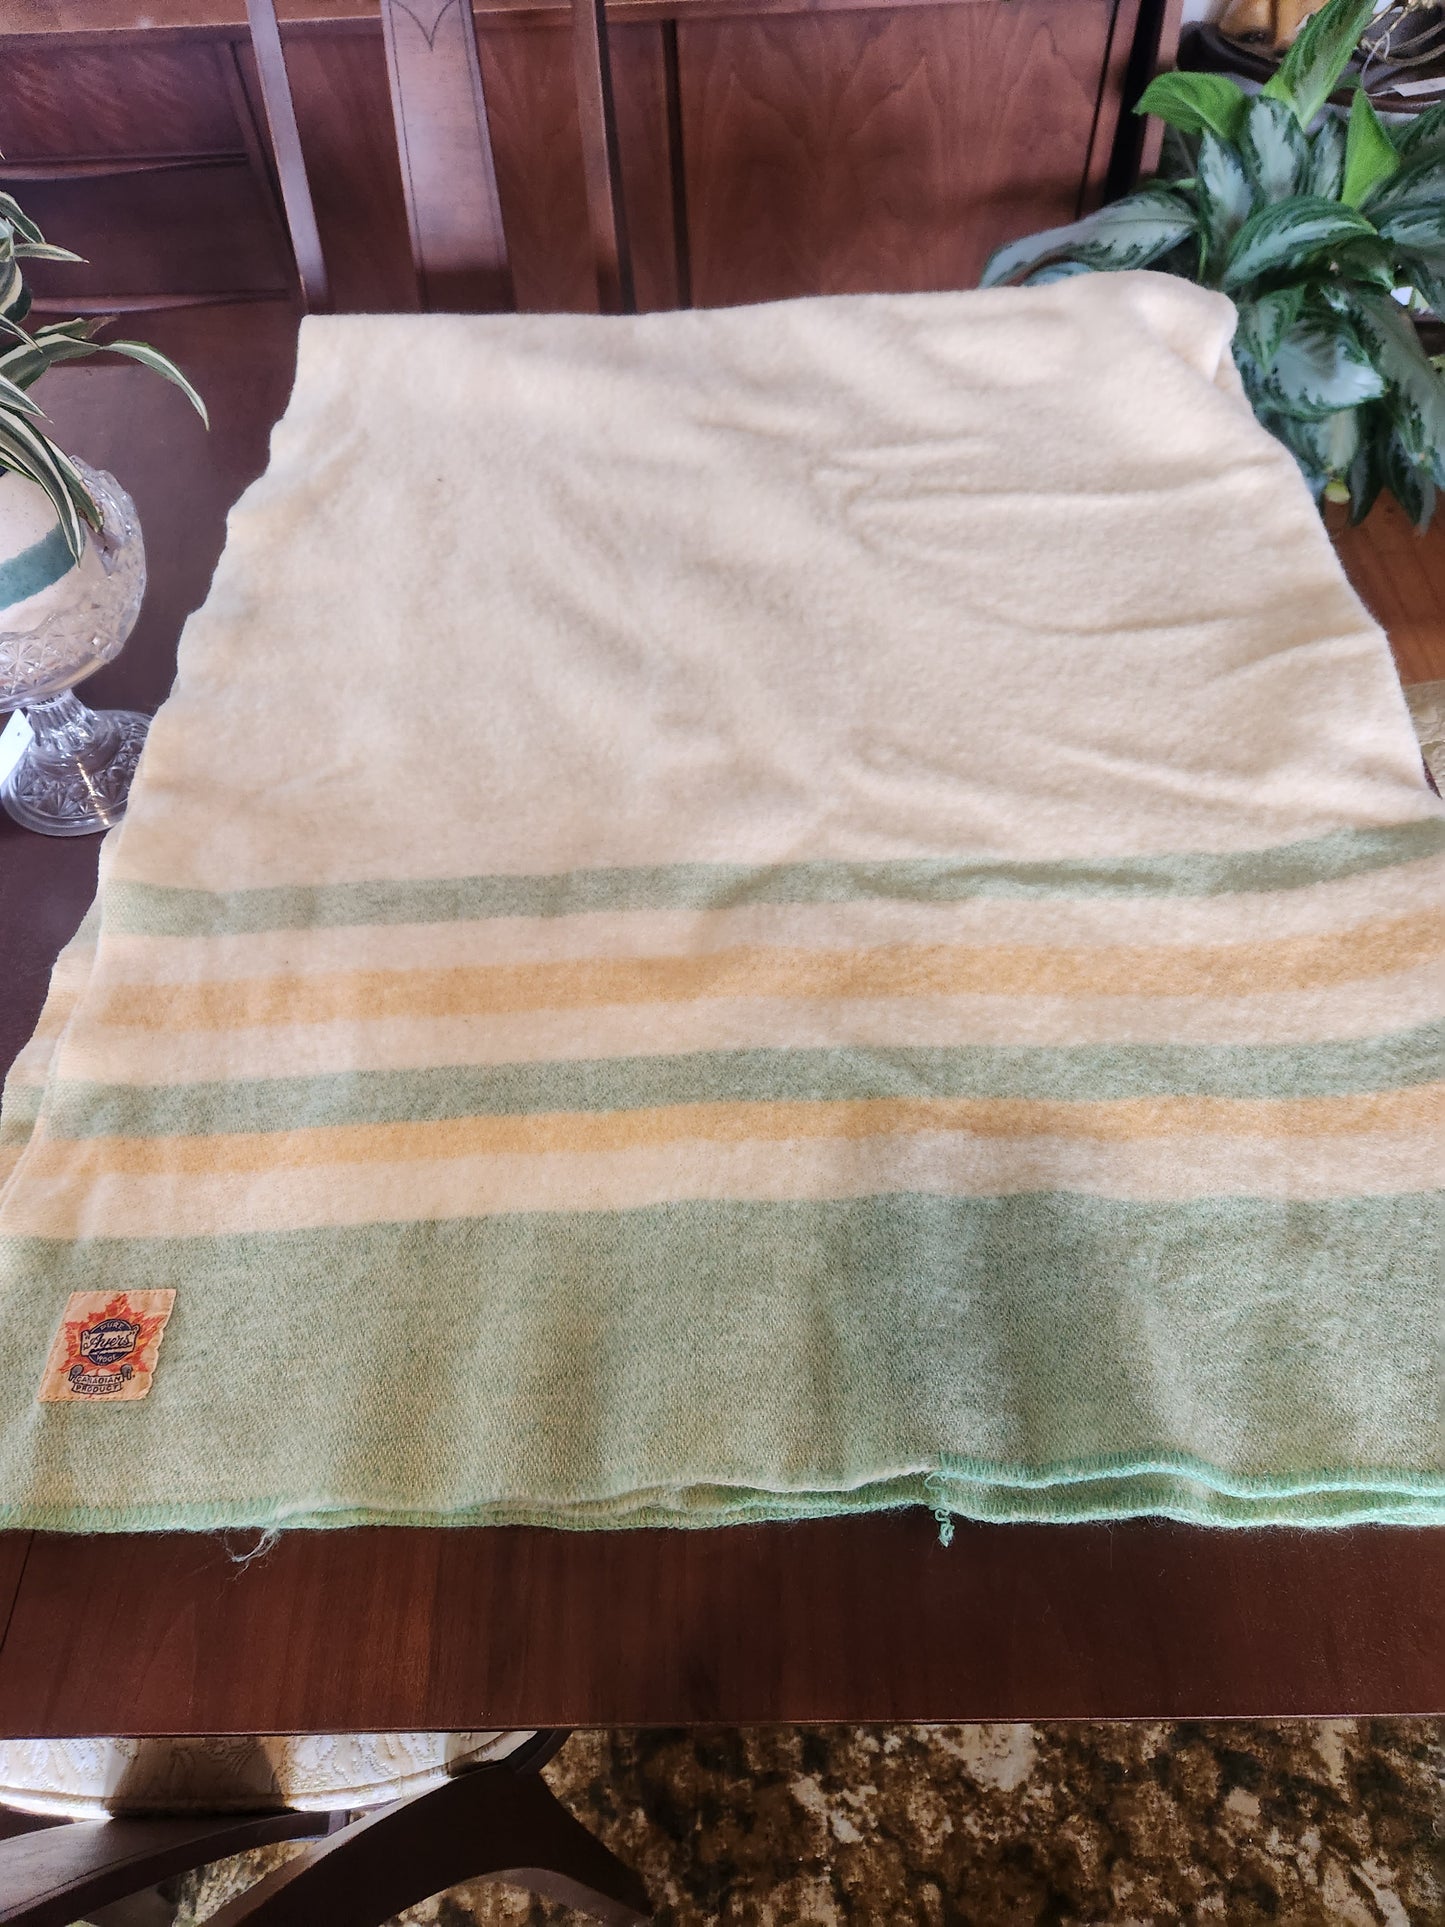 Ayers Green and Yellow Stripe Wool Blanket